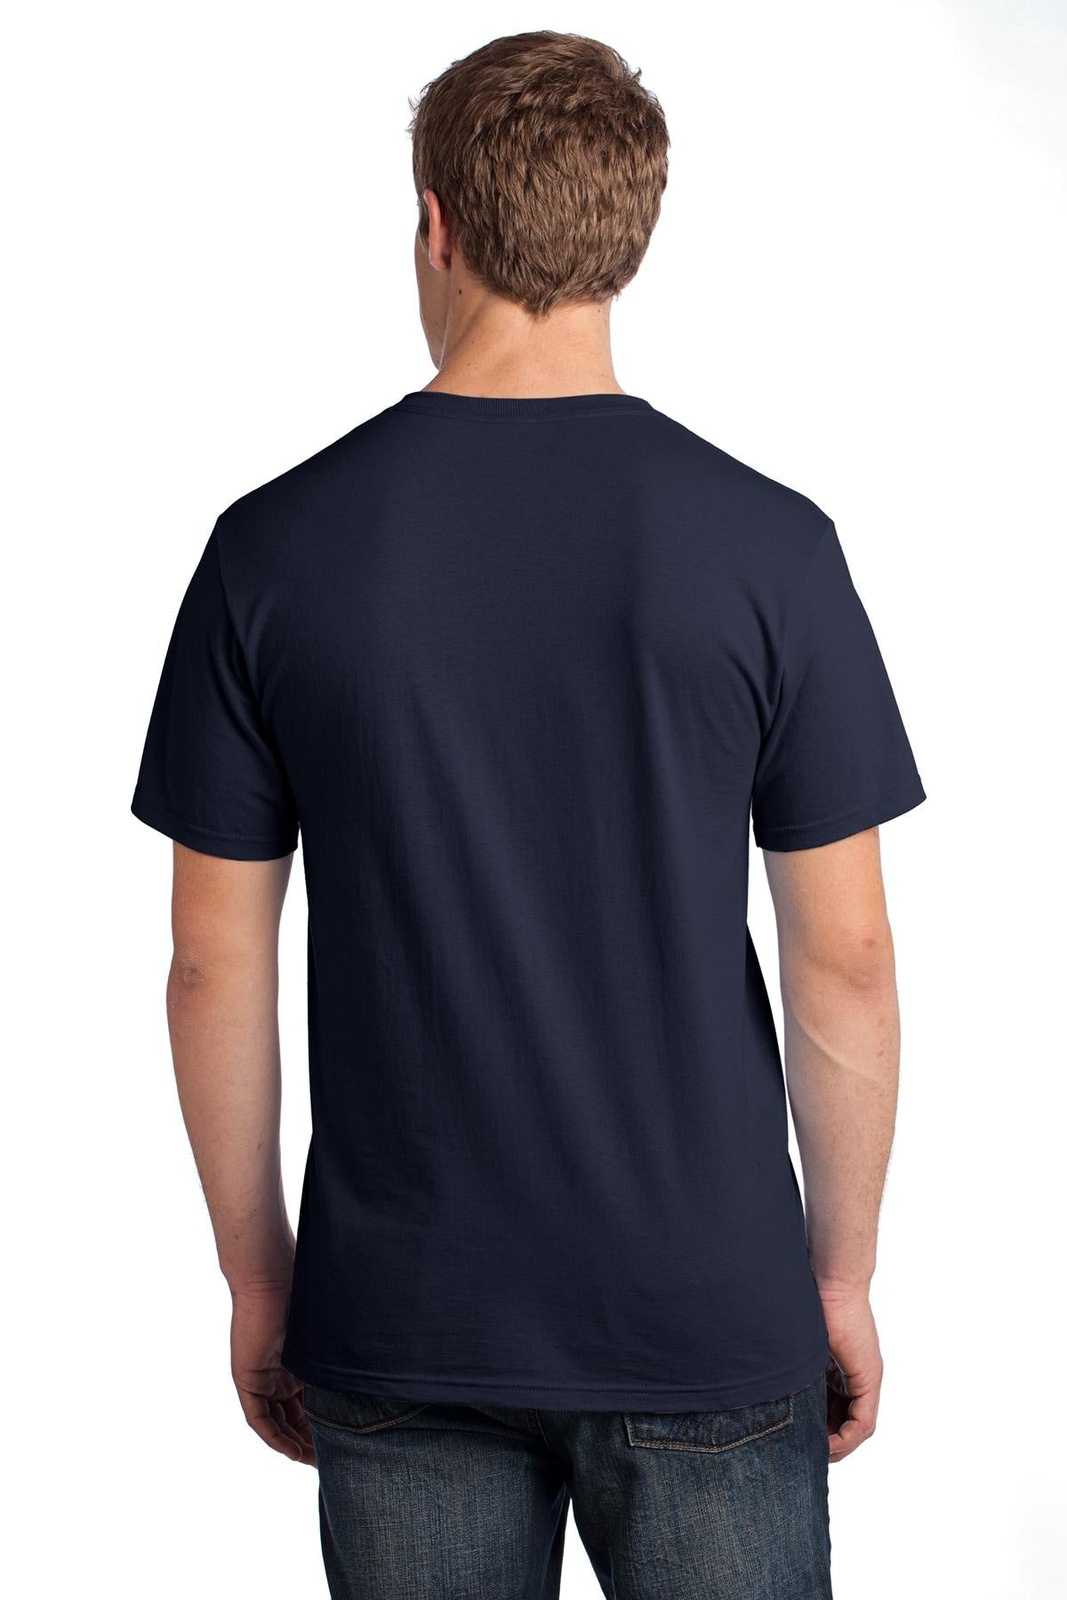 moral koncept friktion Fruit of the Loom 3930 HD Cotton 100% Cotton T-Shirt - Navy